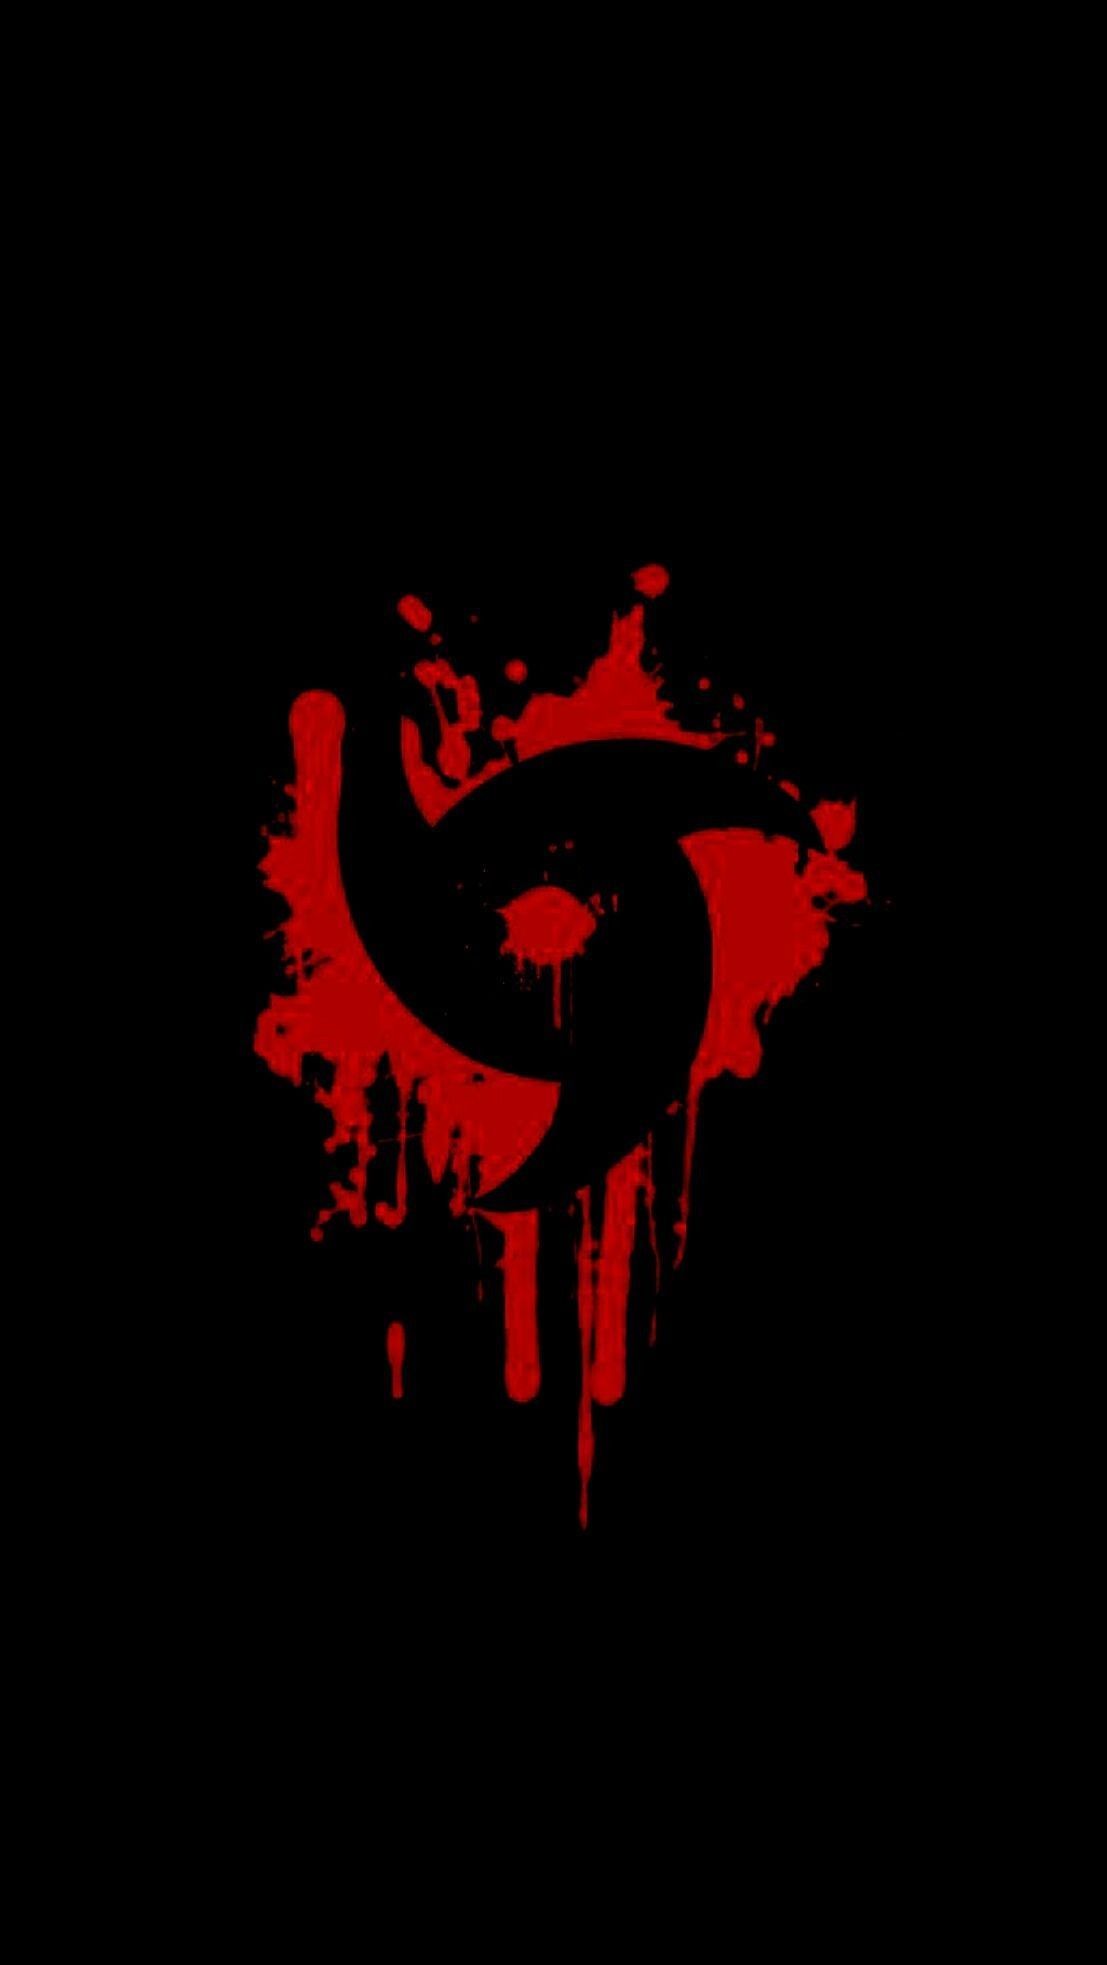 Itachi Uchiha Wallpapers Hd posted by Ethan Walker